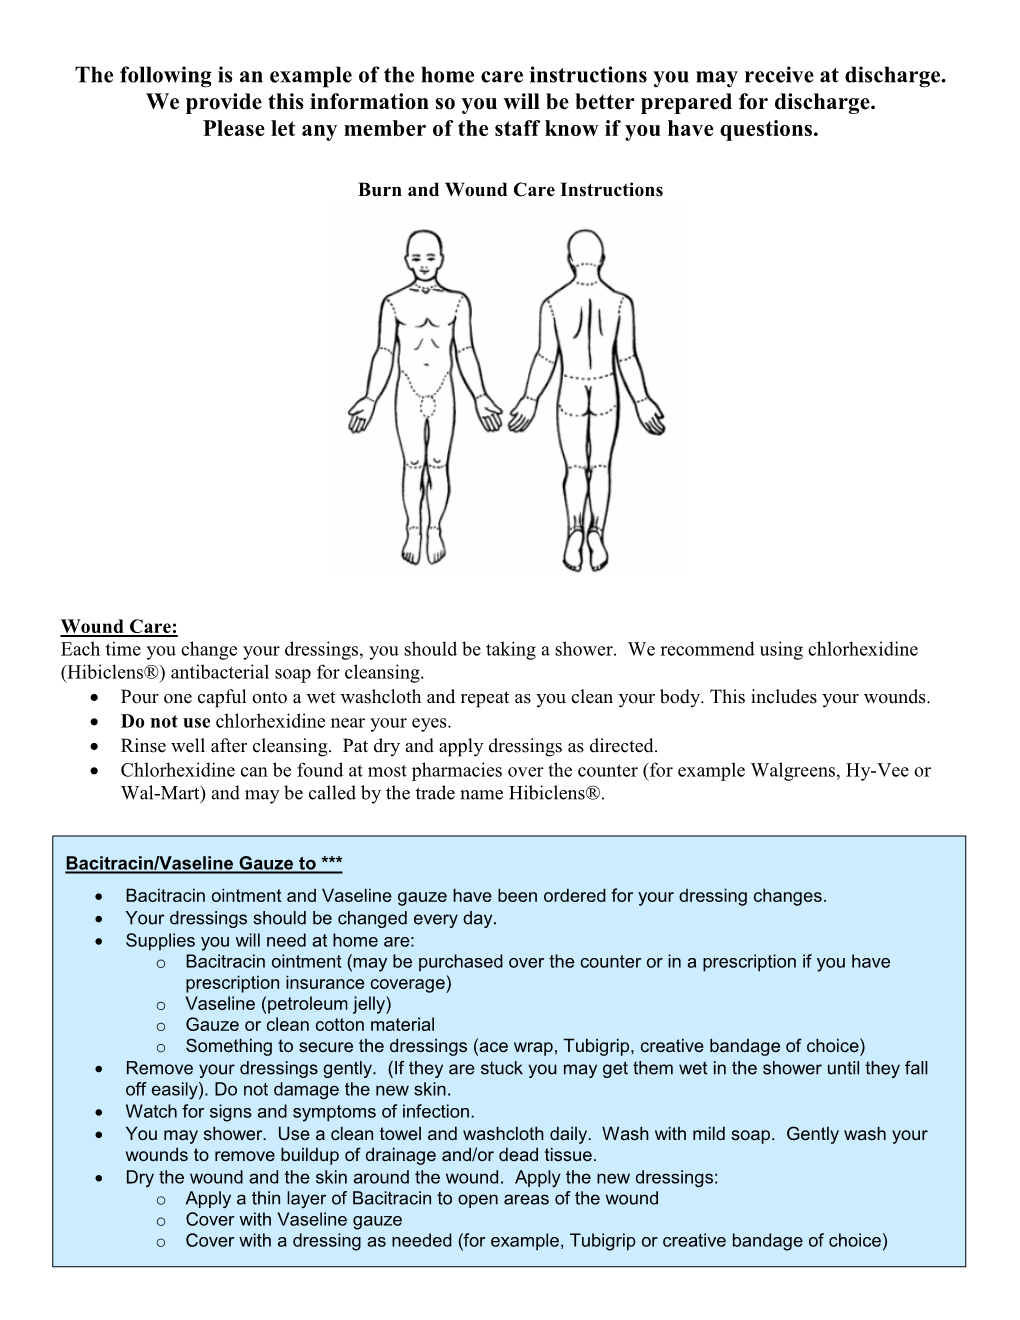 Burn and Wound Care Instructions